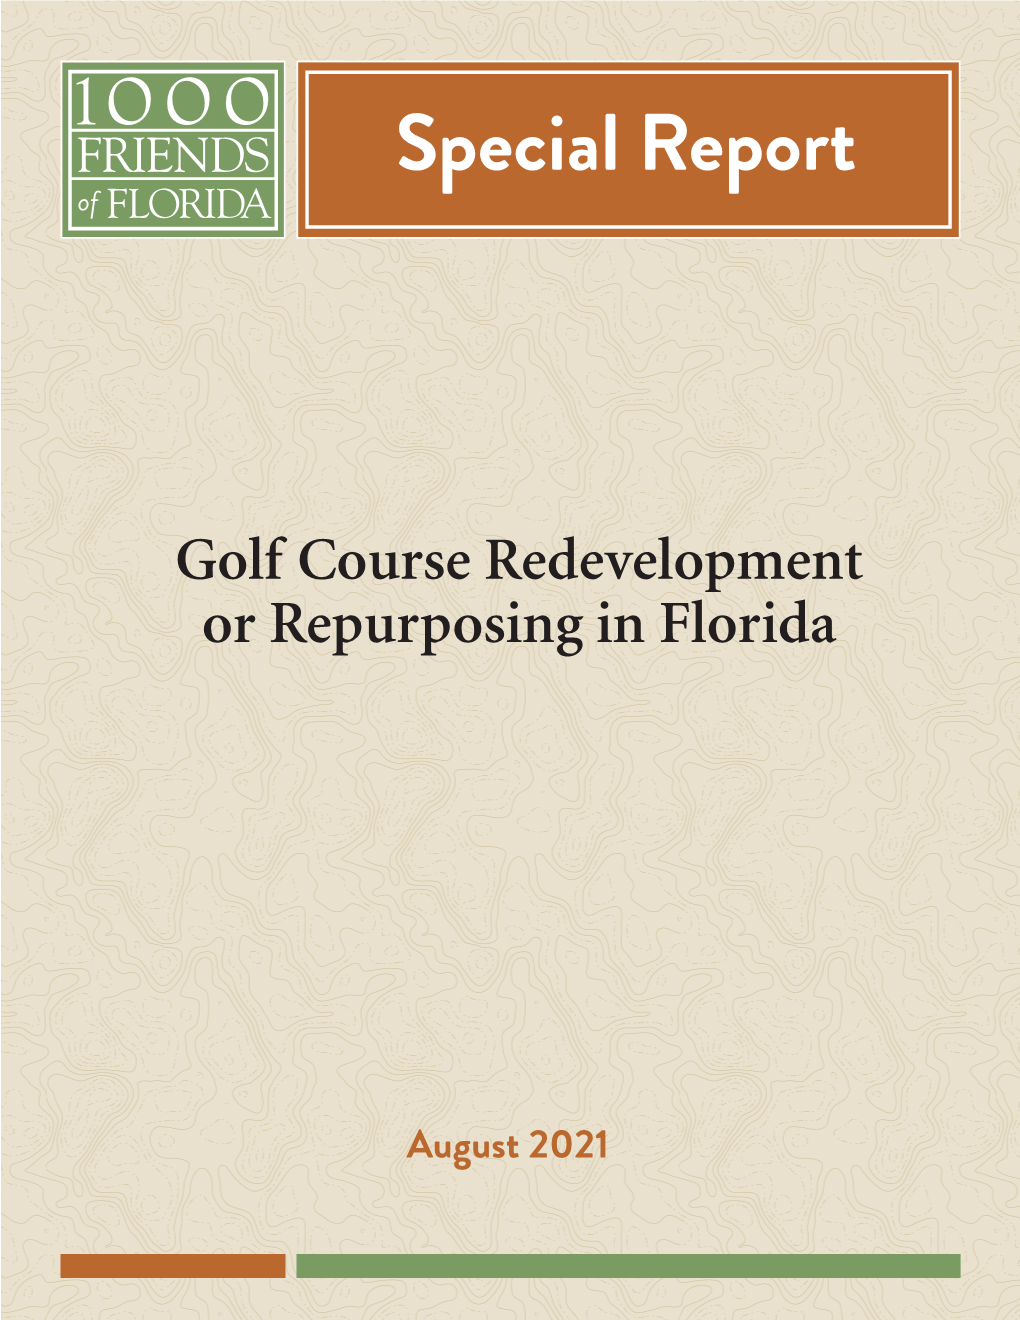 Check out 1000 Friends' August 2021 Special Report on Golf Course